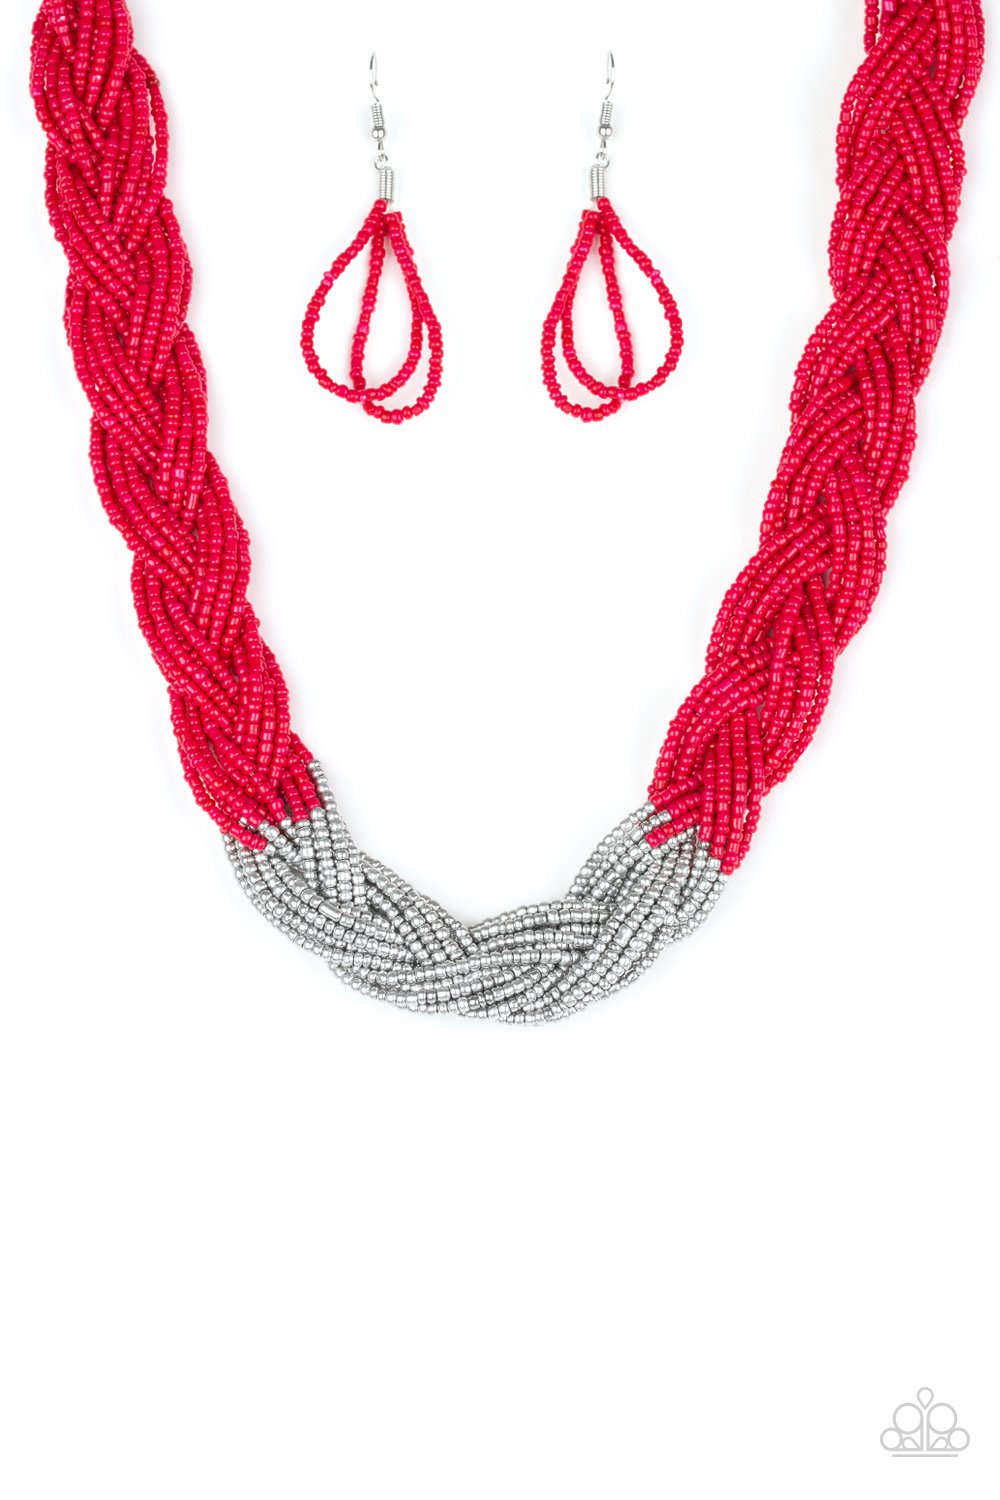 Brazilian Brilliance Red Seed Bead Necklace - Justen Jewels